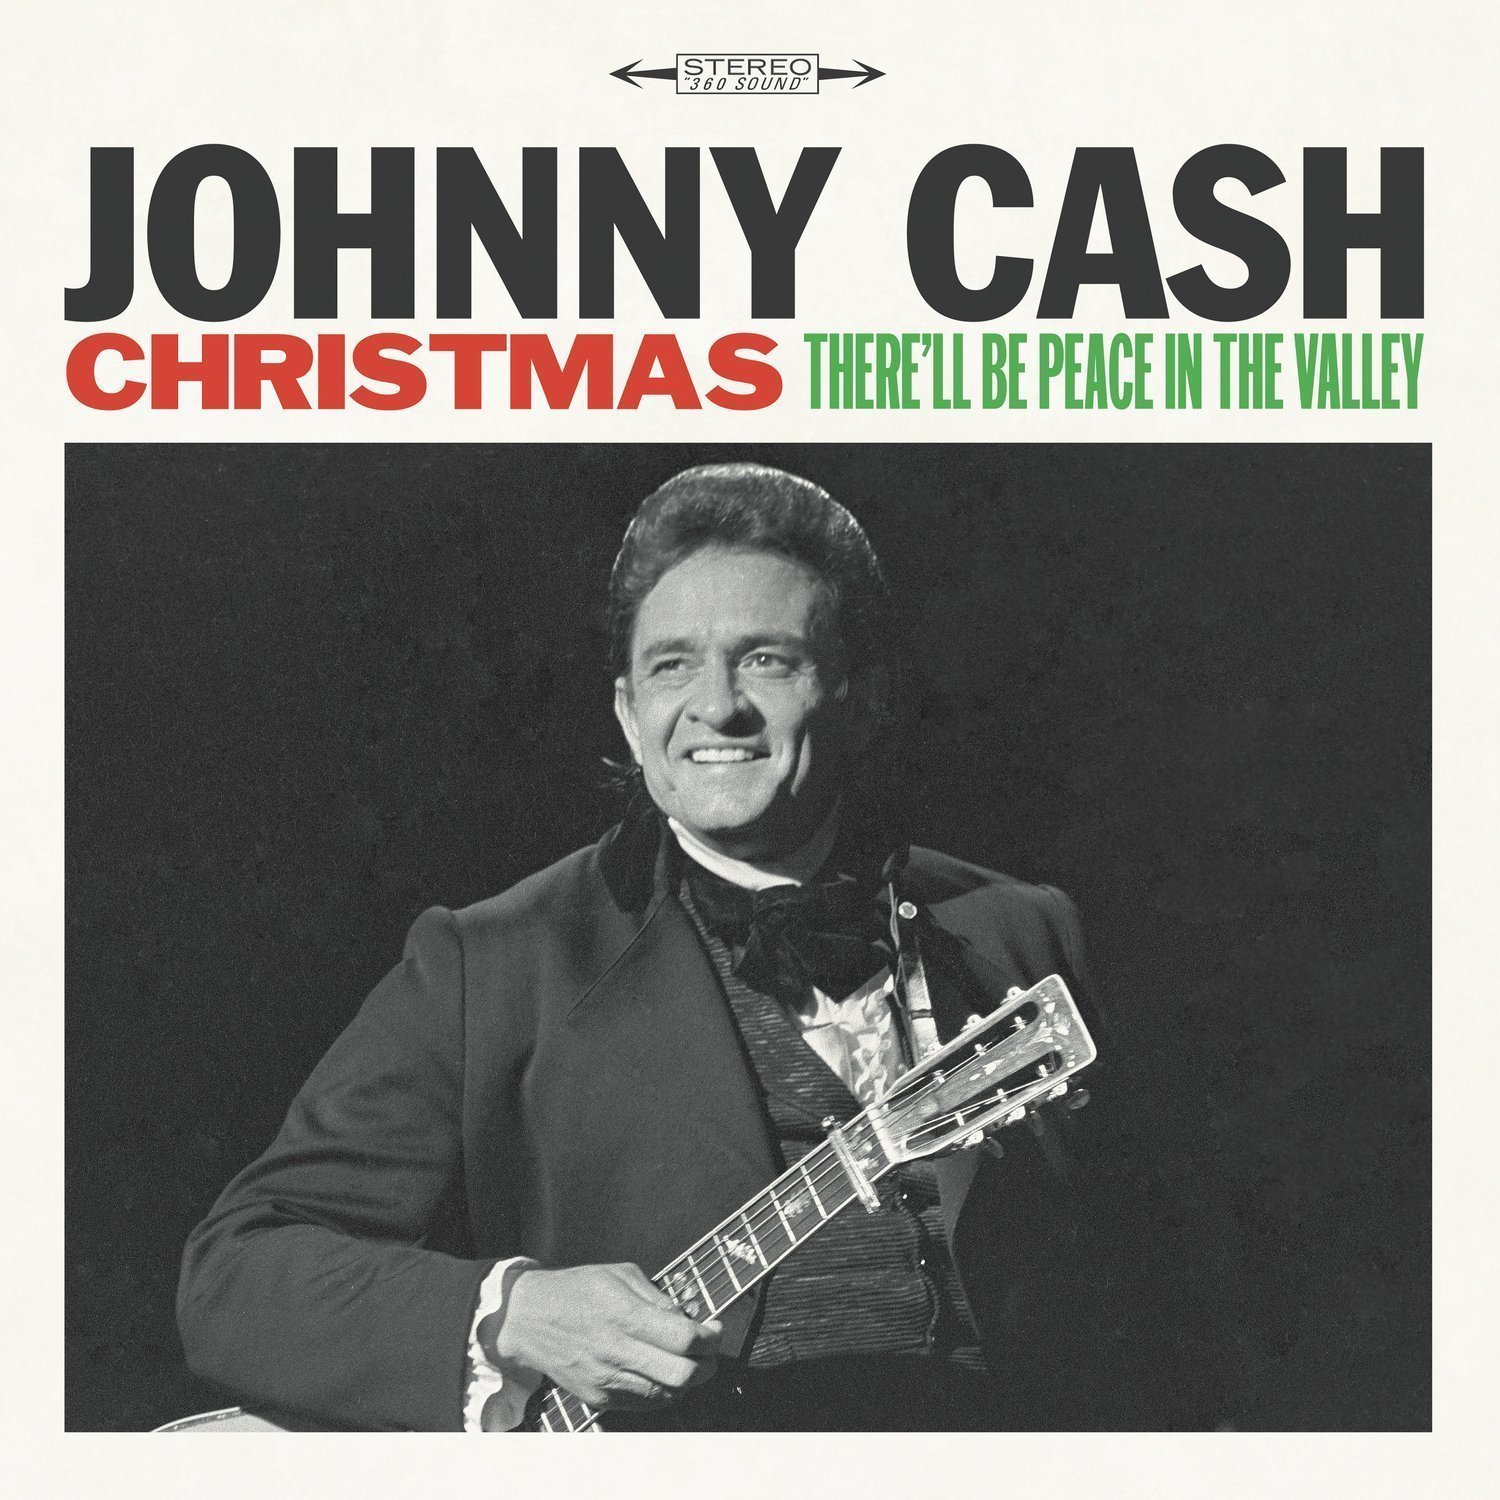 Johnny Cash Christmas: There'll Be Peace In the Valley (LP) Johnny Cash